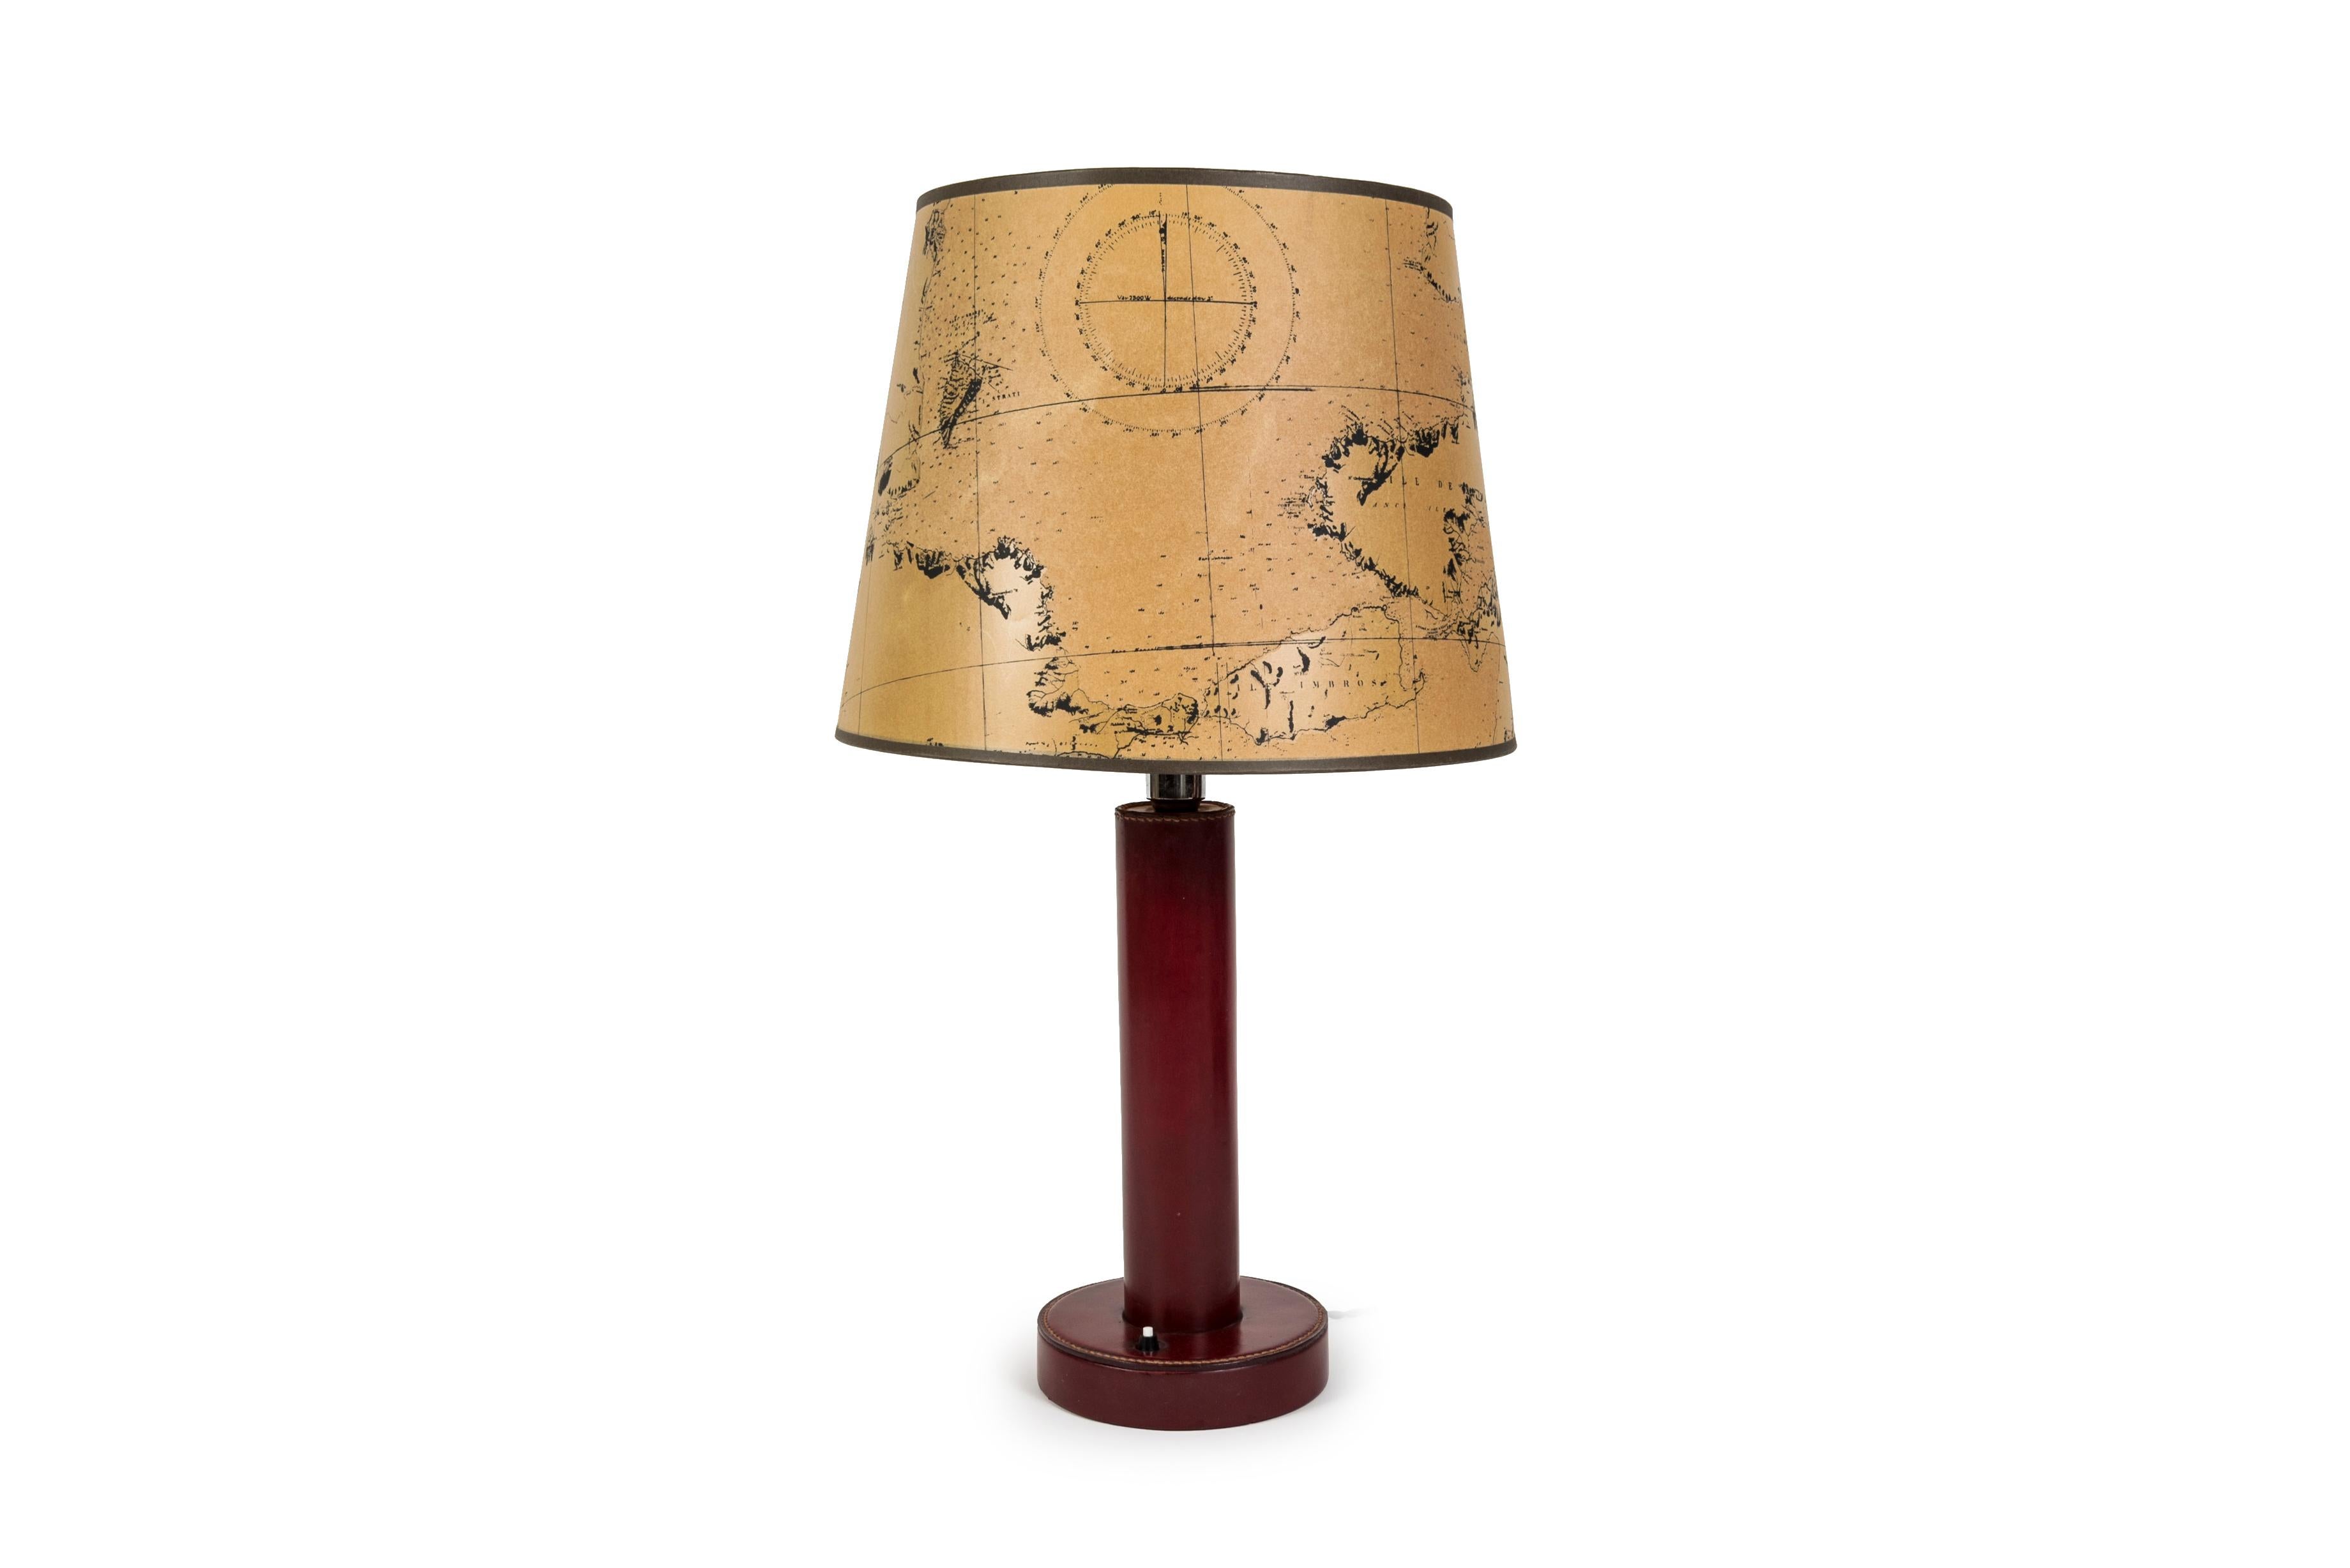 Very nice burgundy leather lamp in the style of Paul Dupre-Lafon for maison Hermes
Very good vintage condition
Dimensions given without shade
Shade not included.